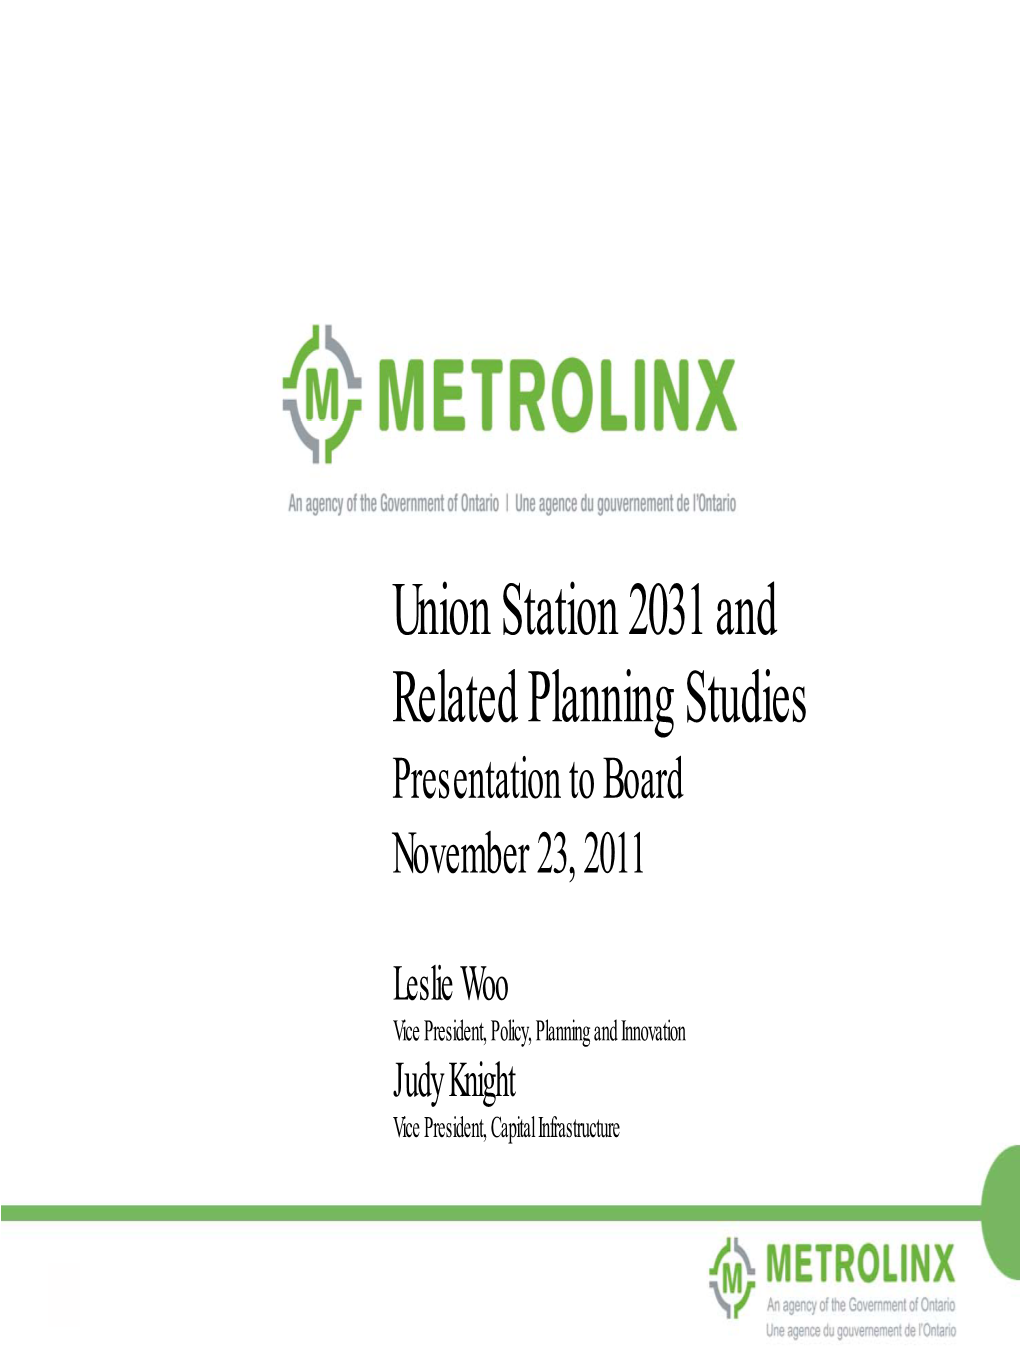 Union Station 2031 and Related Studies